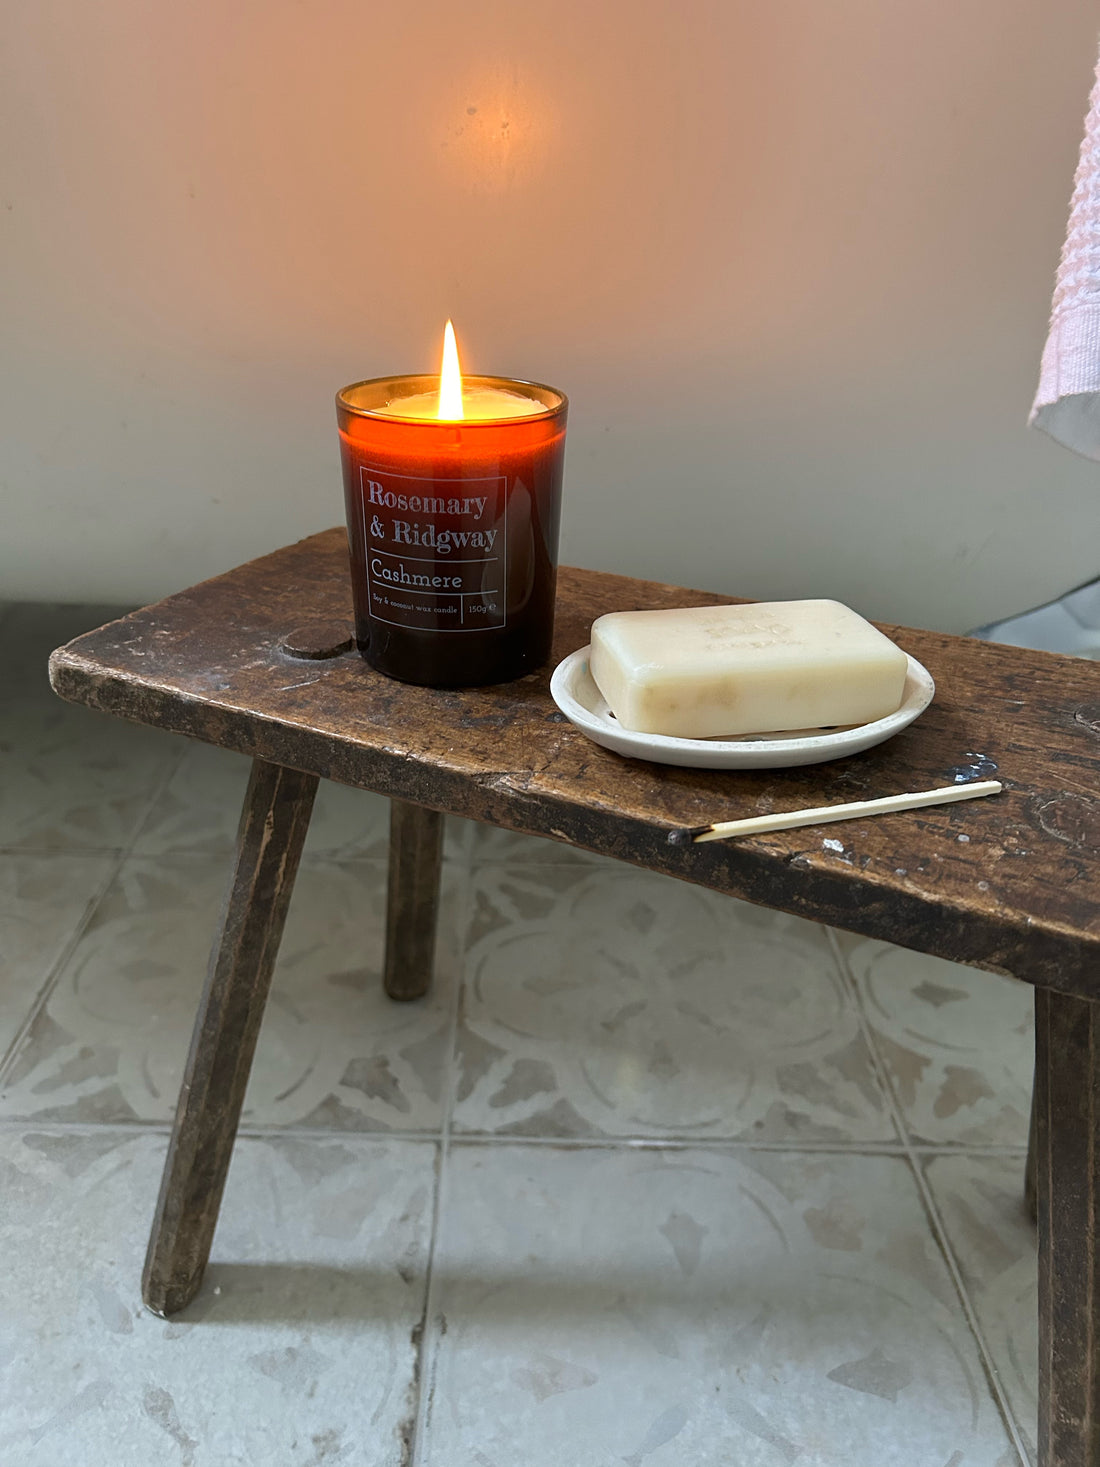 Our cashmere candle in amber jar in the bathroom